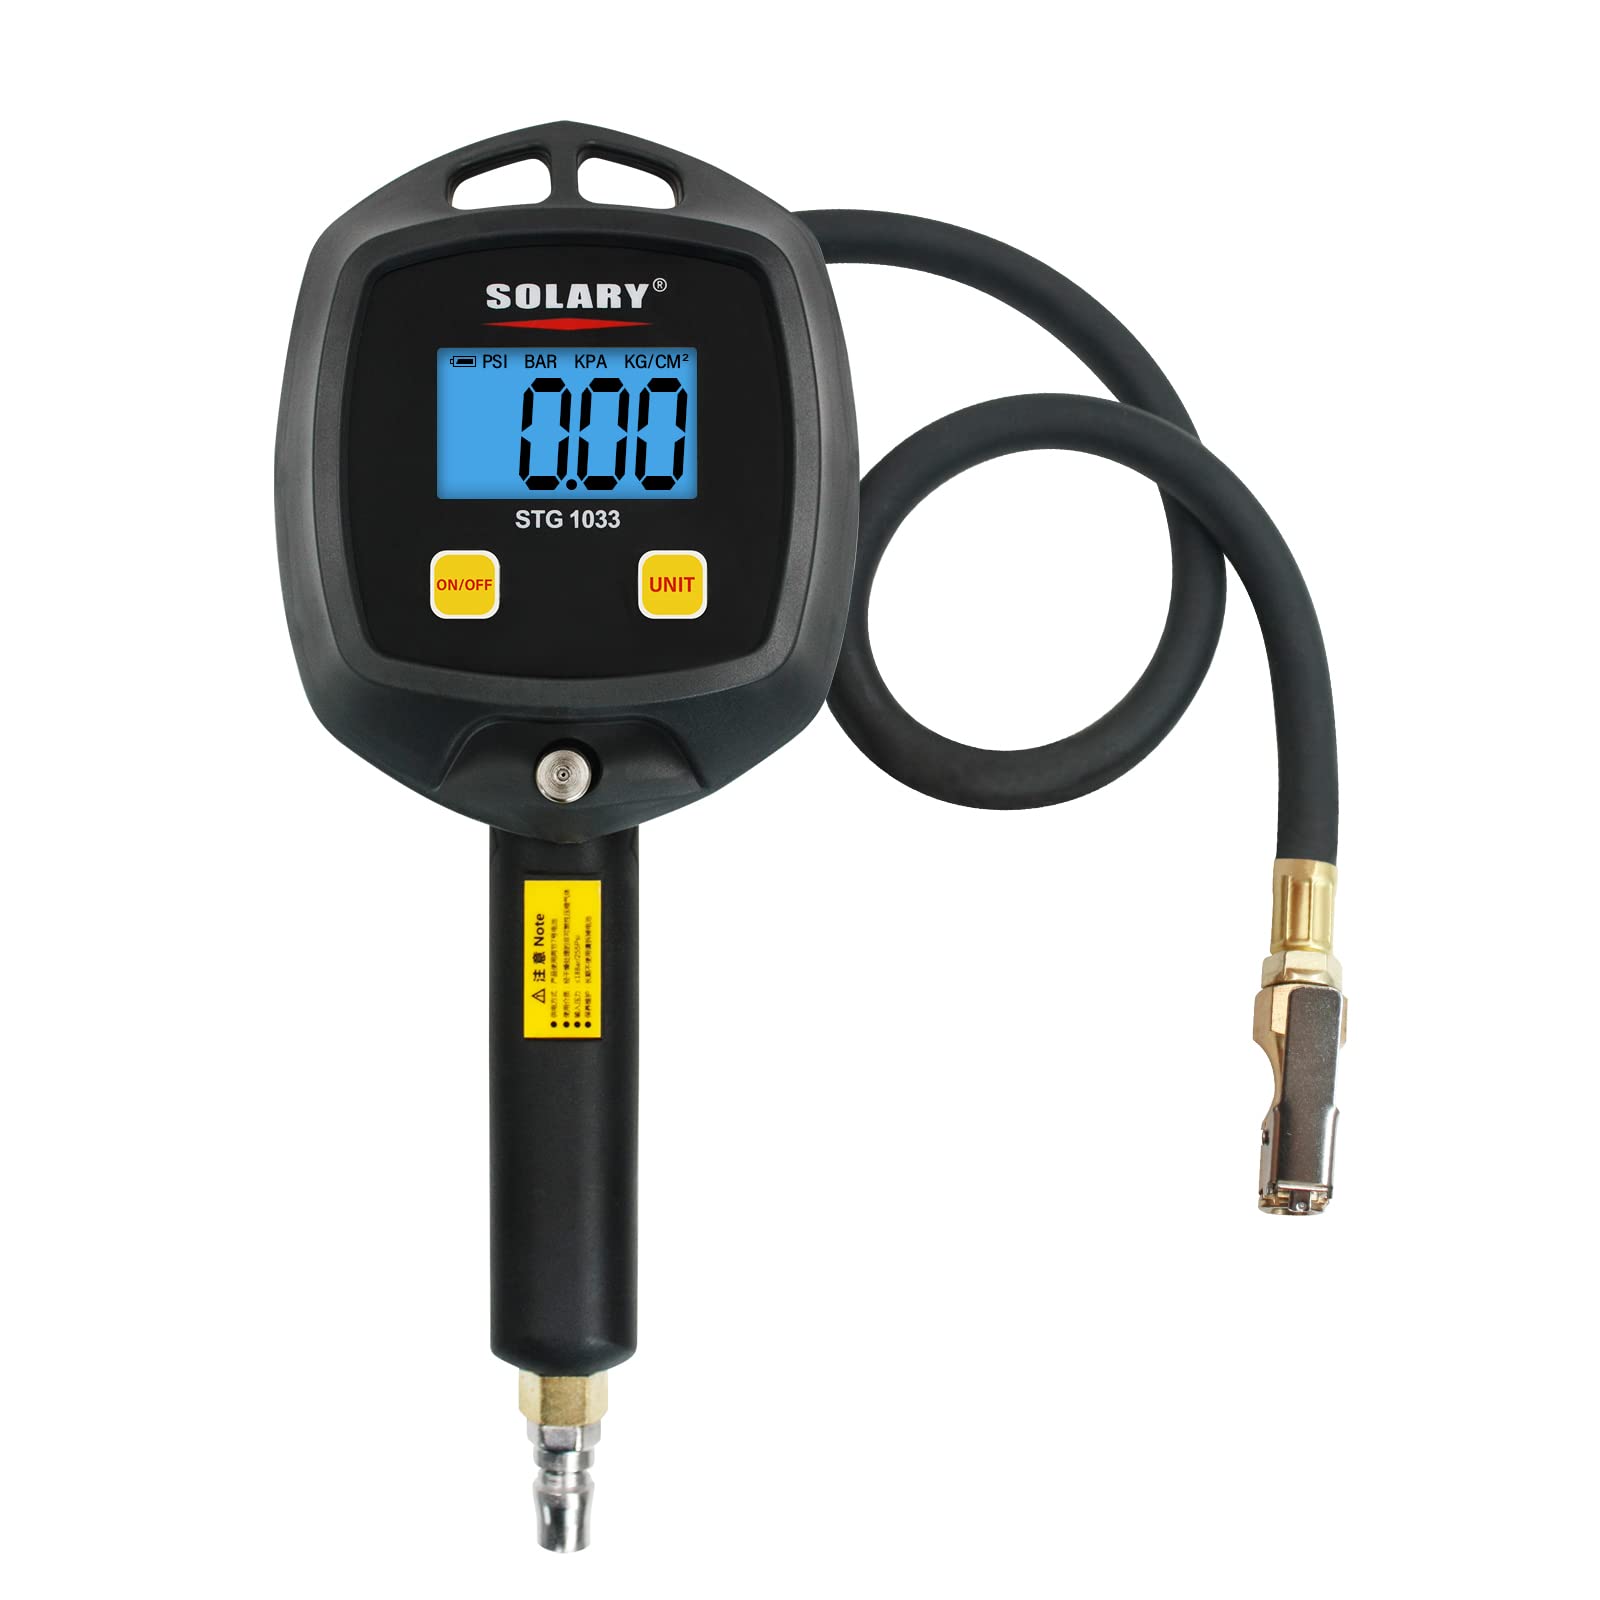 Solary Digital Tire Inflator with Pressure Gauge, 255 PSI LED Display Tire Inflator Gauge with Rubber Hose for Car Motorcycle Bike Truck - Auto Body Collision Repair Welding Products